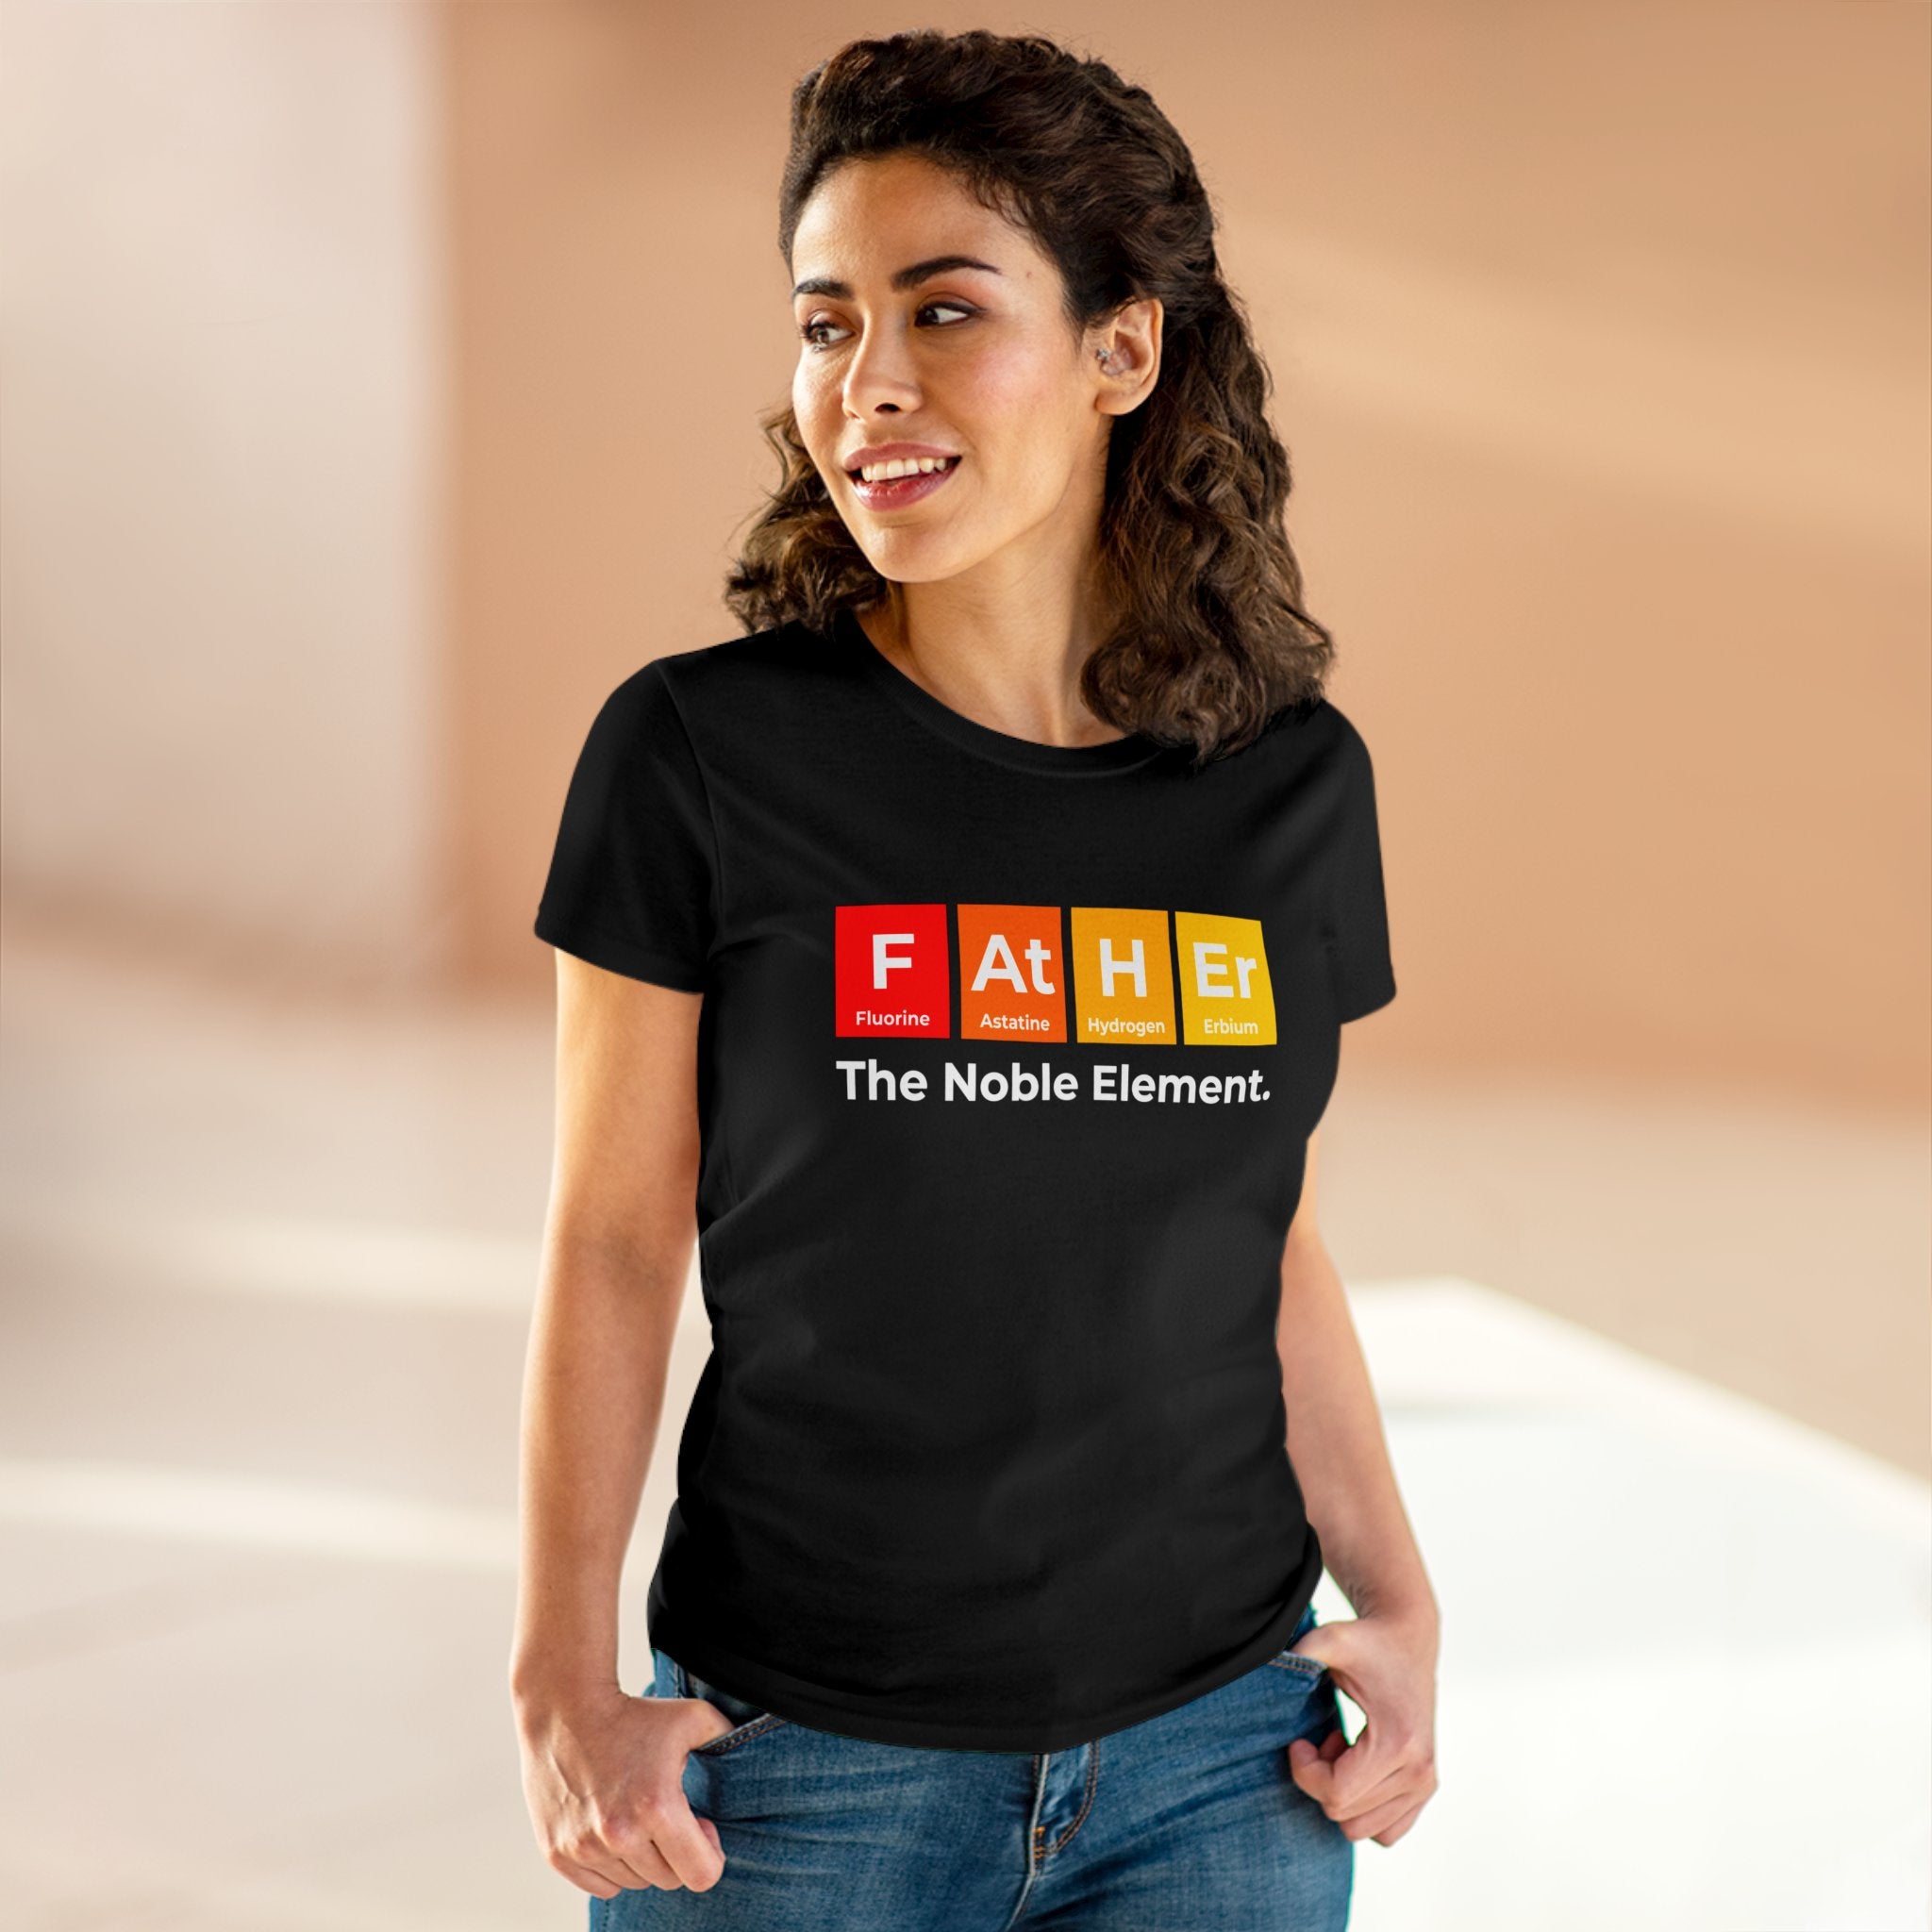 Woman wearing a black, 100% cotton t-shirt with a design mimicking periodic table elements spelling "Father" and the phrase "The Noble Element." She is standing indoors with a neutral background, showcasing the Father Graphic - Women's Tee that offers warm and cozy comfort.